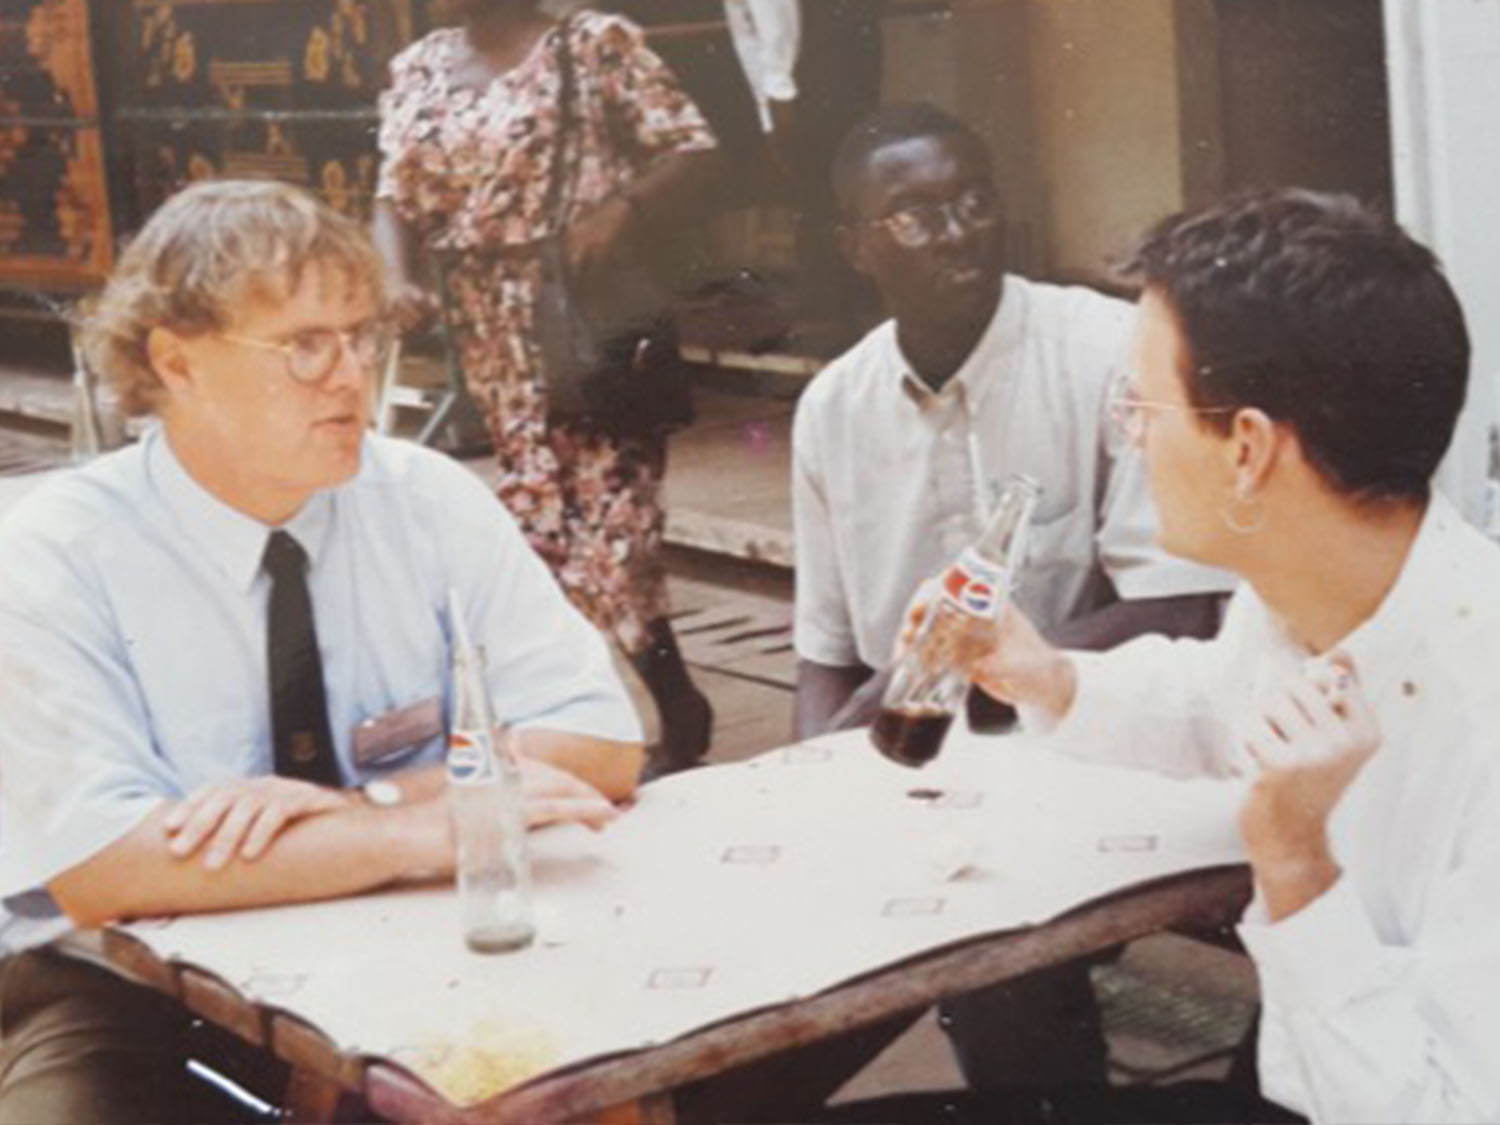 Cheikh Mbow with Danish friends Thomas Theis Nielsen (right) and Lars Nielsen (left) in Ghana 1998. Photo: Cheikh Mbow curtesy.